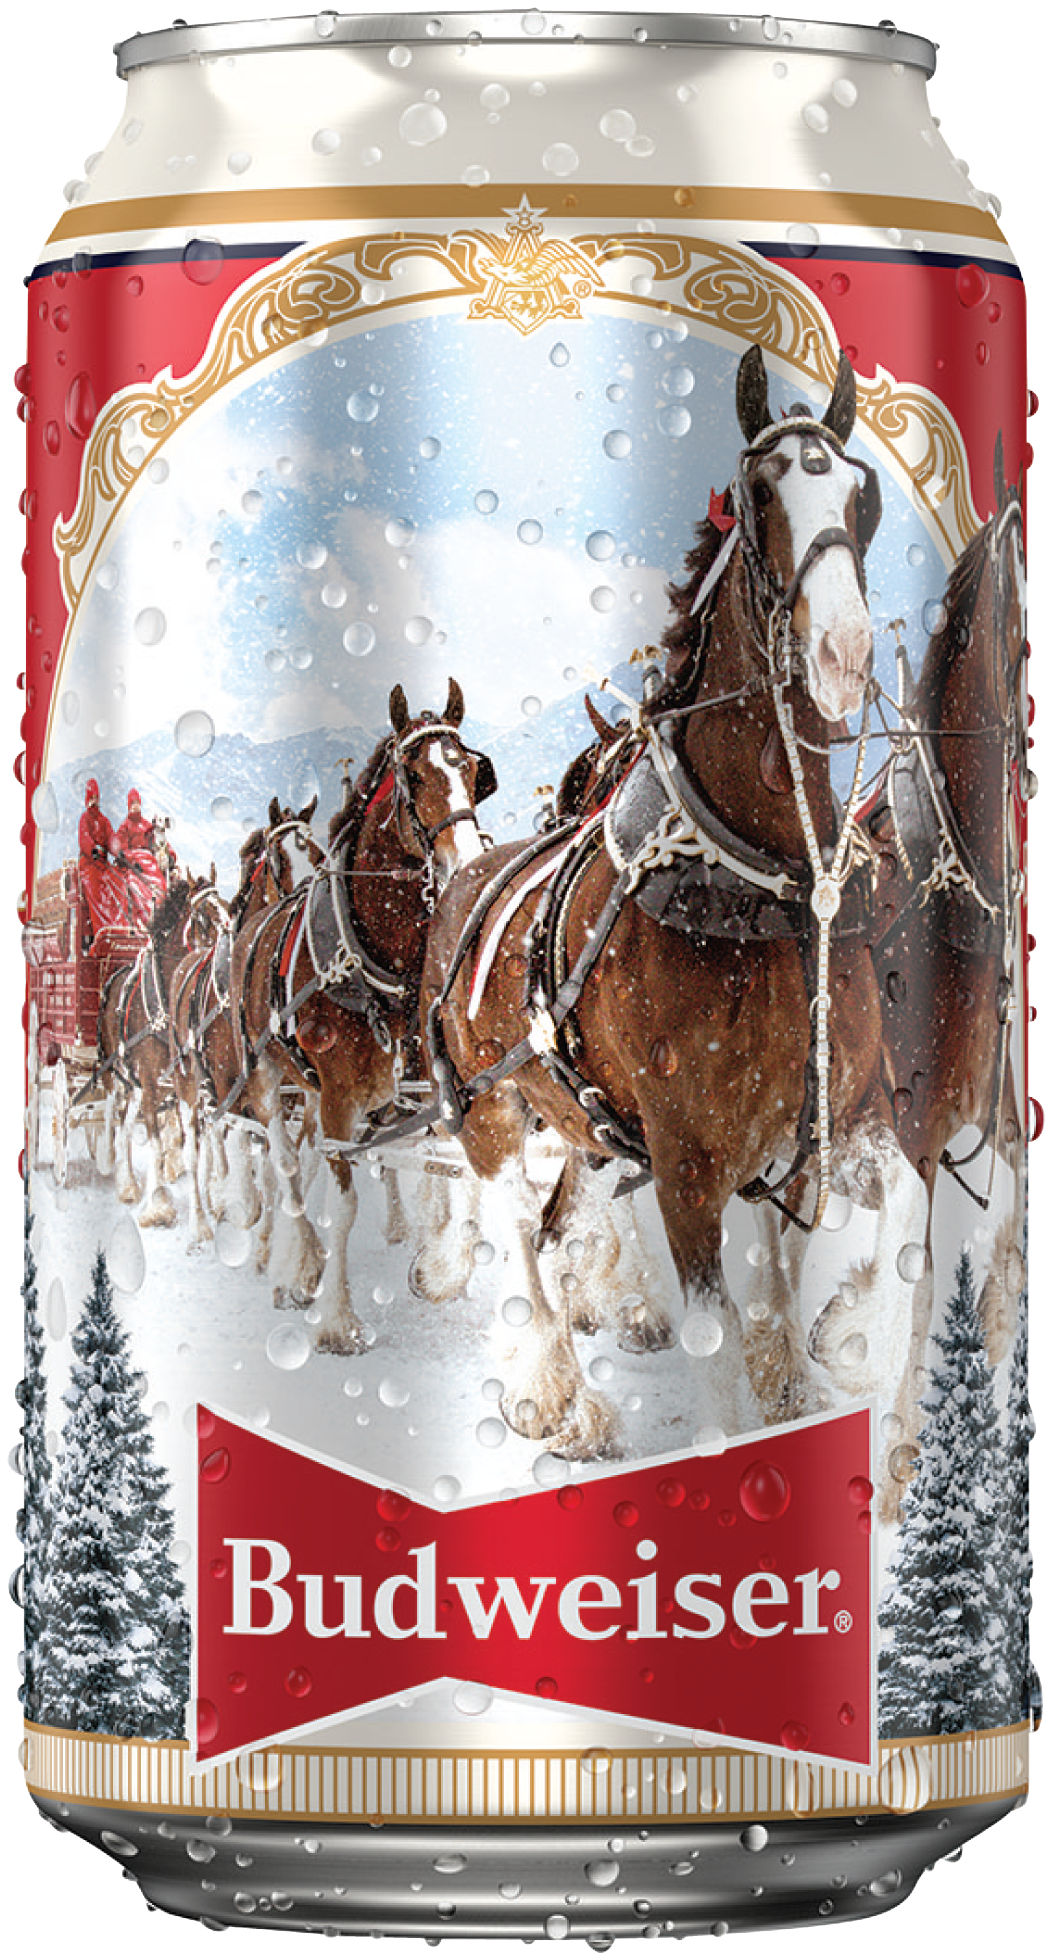 BUDWEISER 2020 HOLIDAY BEER CAN 12 OZ BOTTOM OPENED #3 OF 4 GREEN CLYDESDALE CAN 